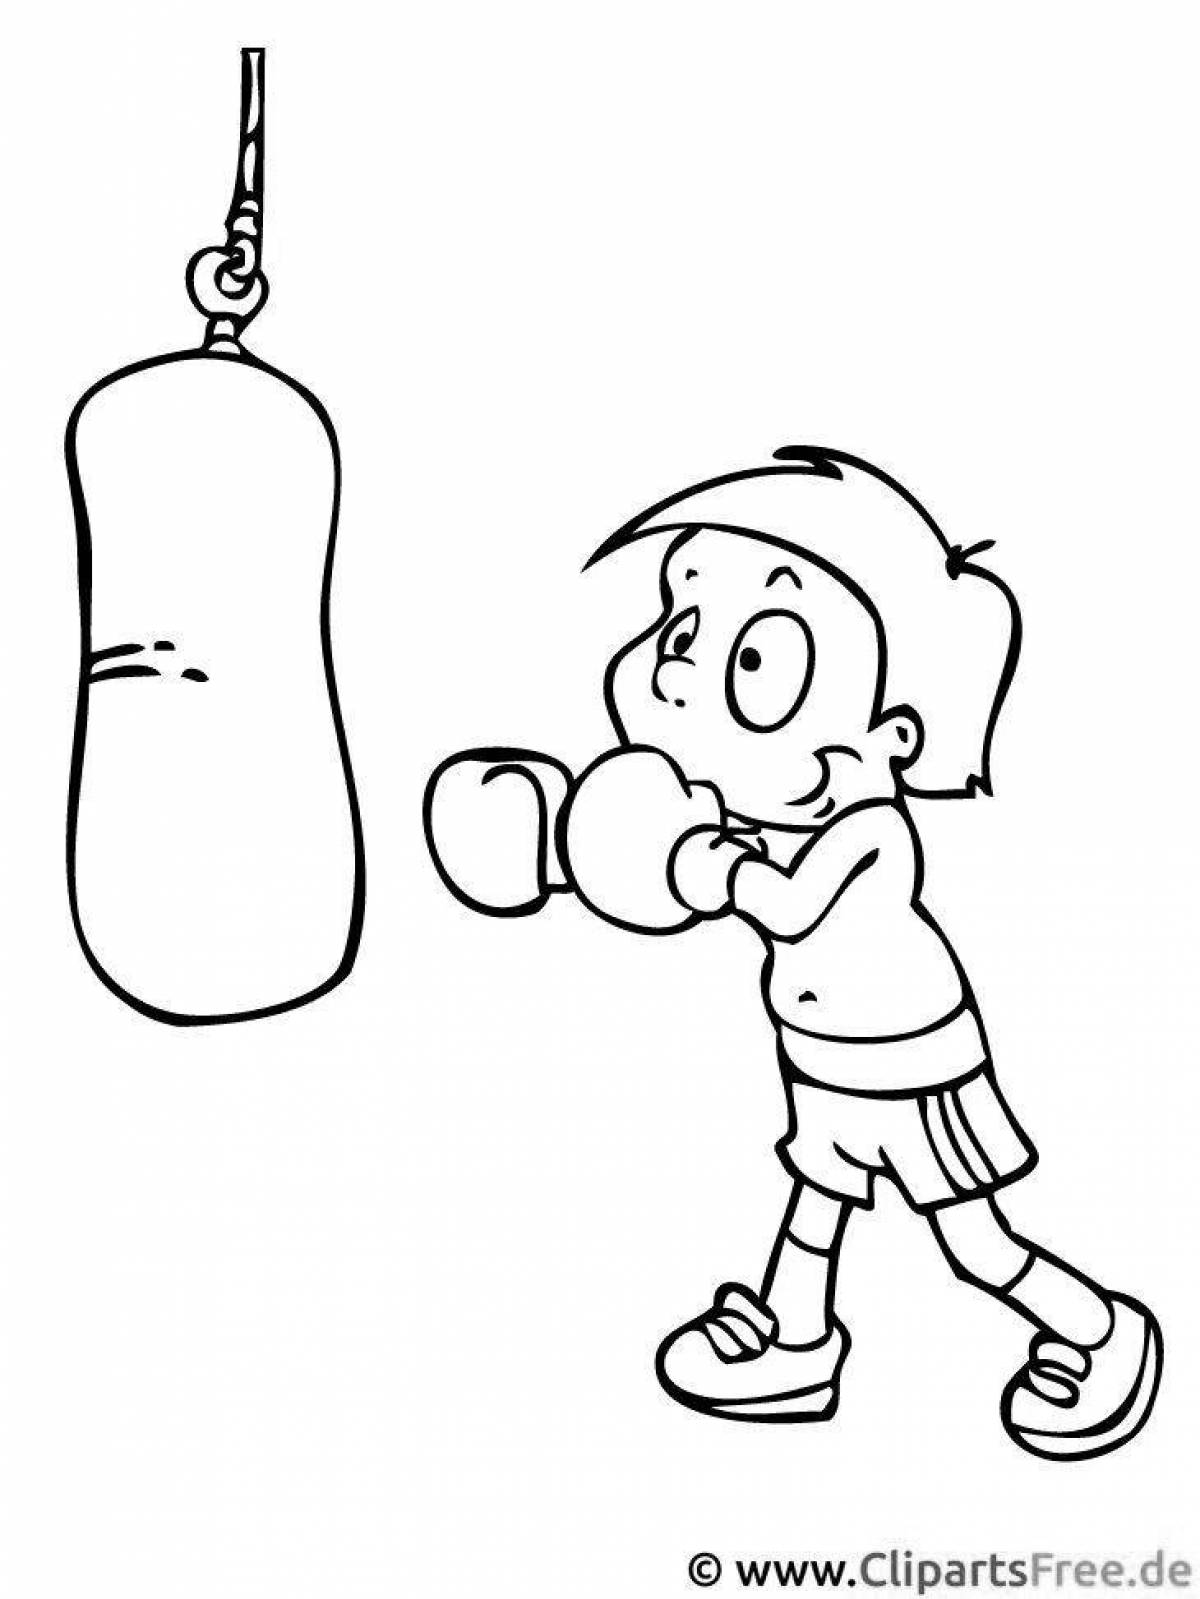 Gorgeous boxer coloring page